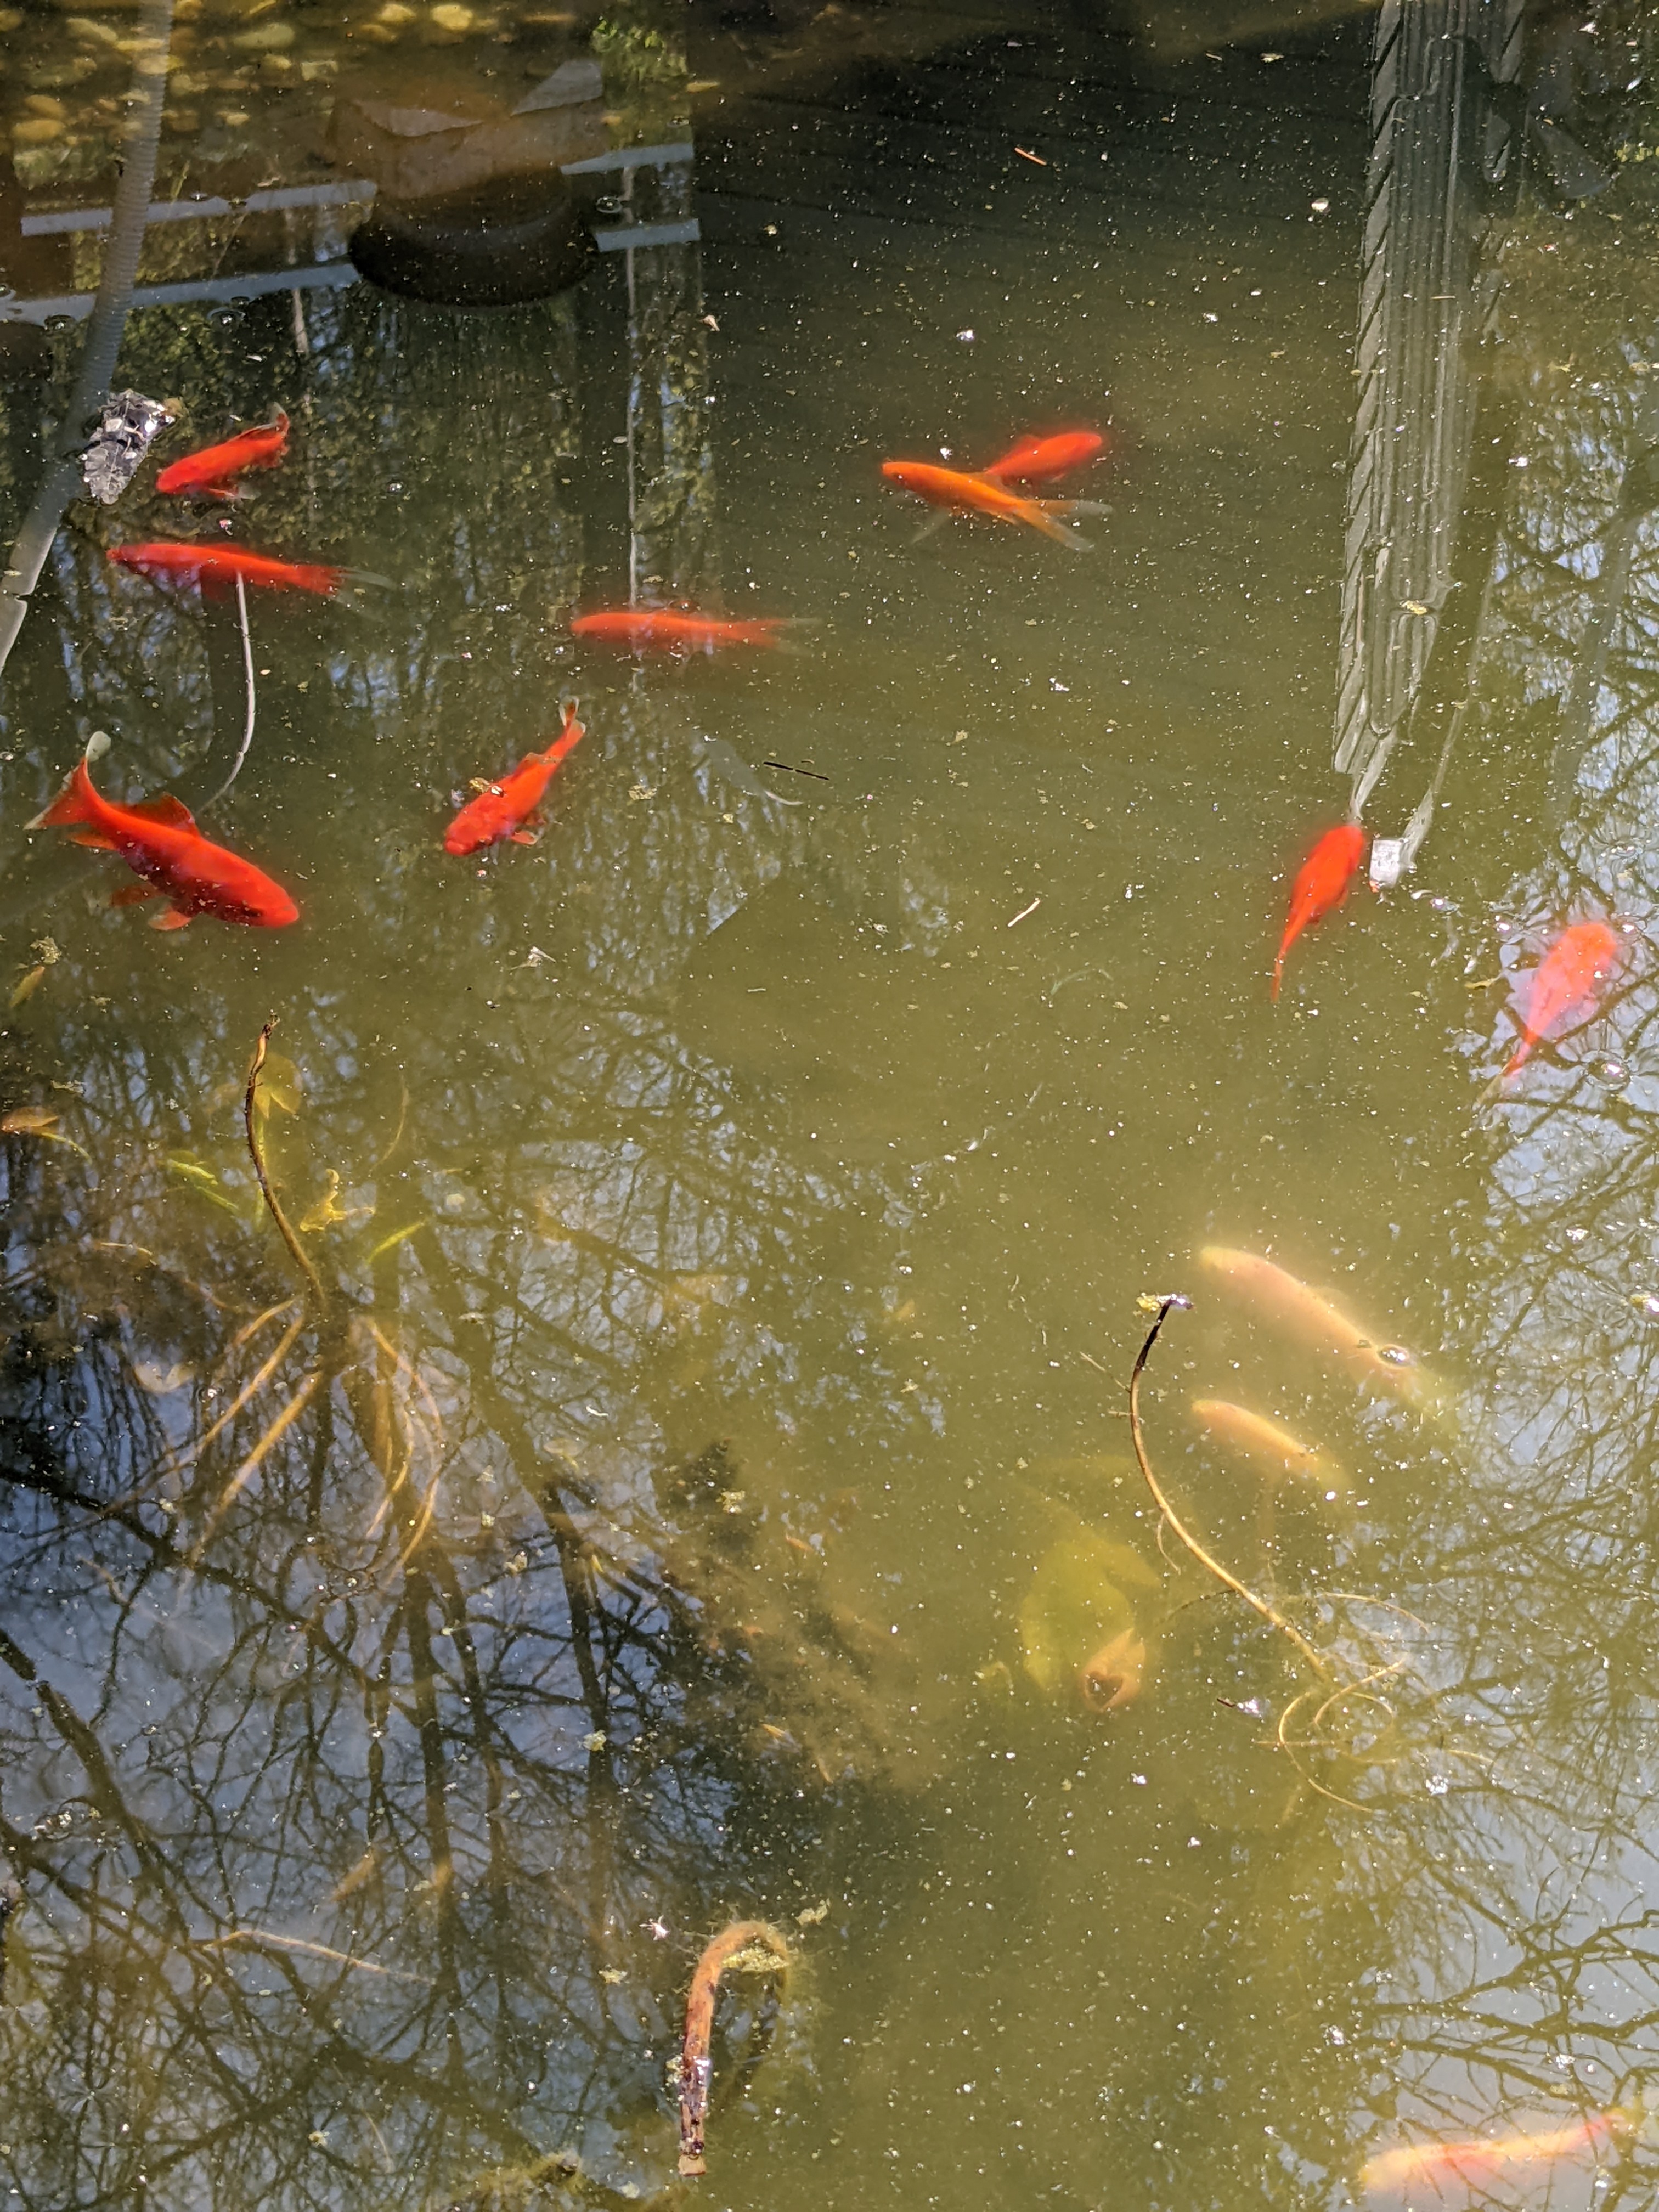 A pond with fish